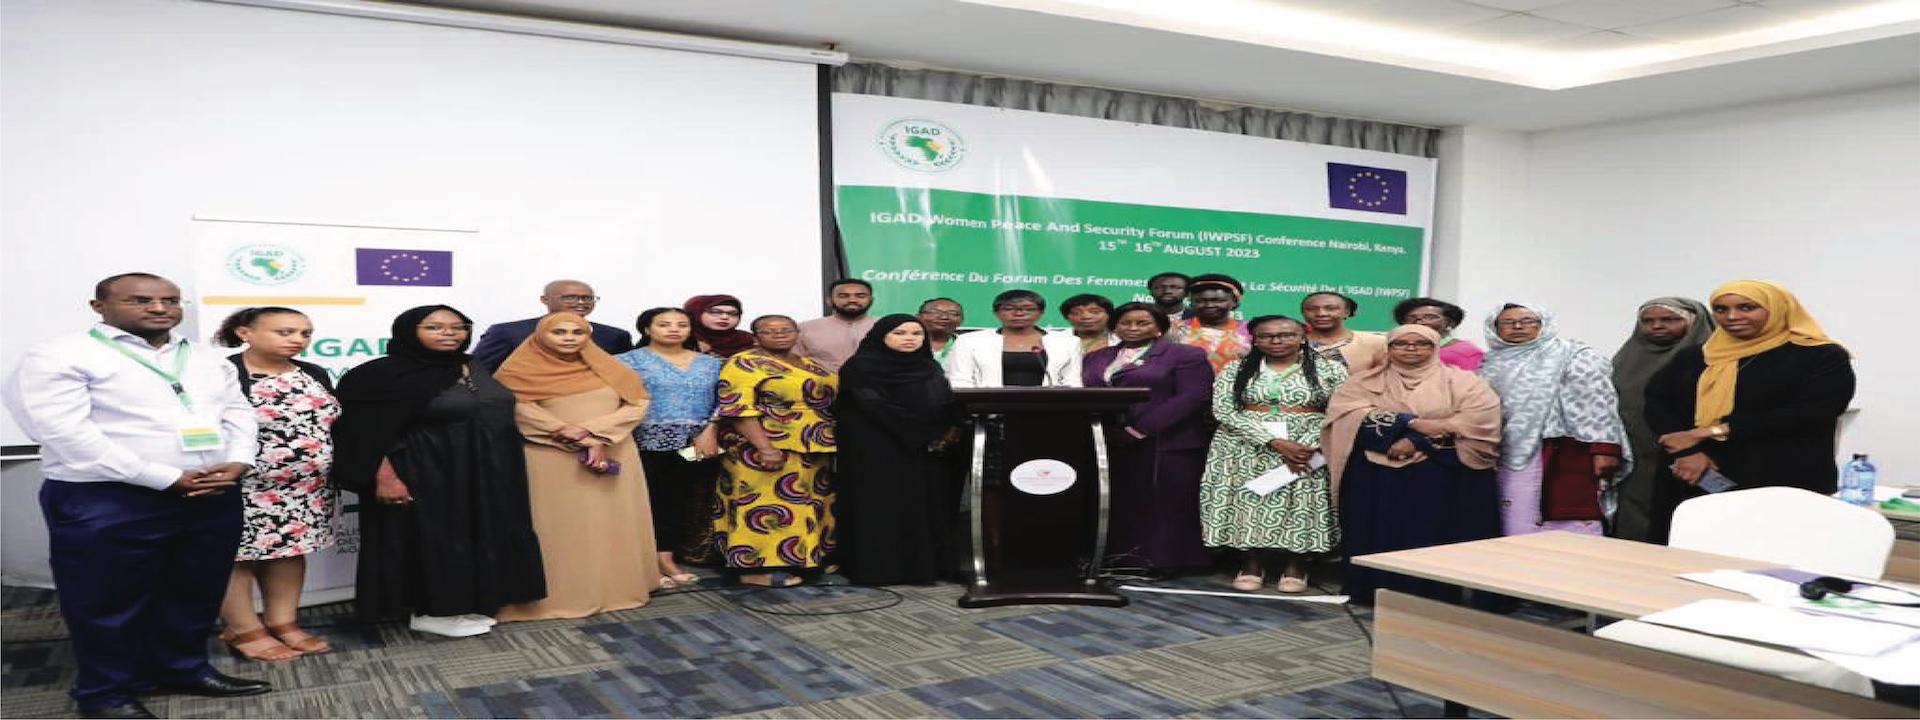 IGAD Holds a Conference to Operationalise it’s Women ,Peace and Security Forum